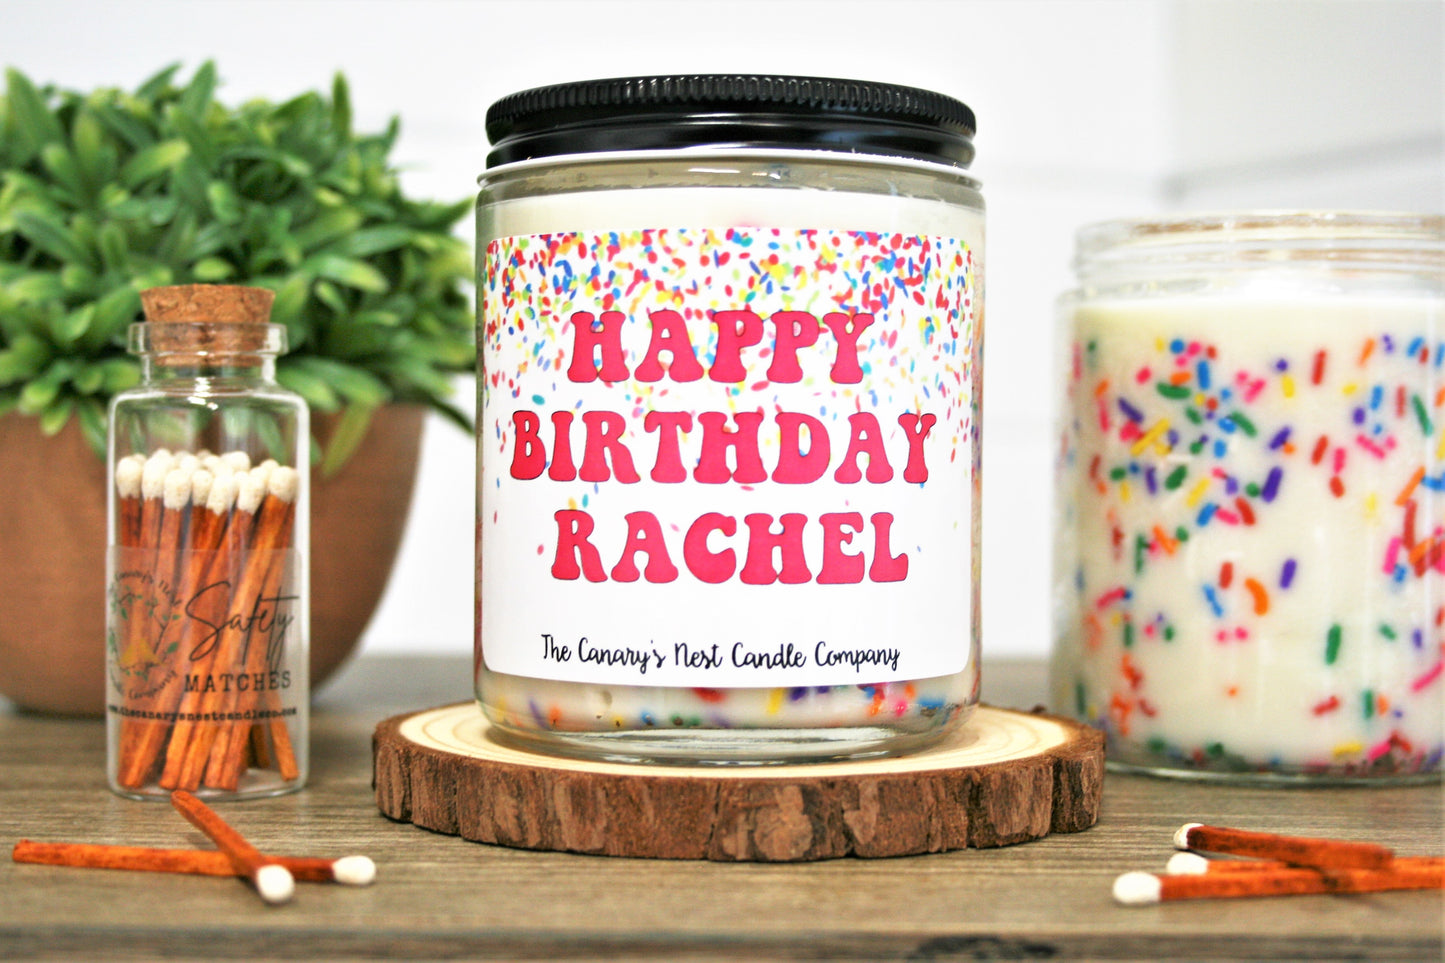 Birthday Cake Scented Soy Candle